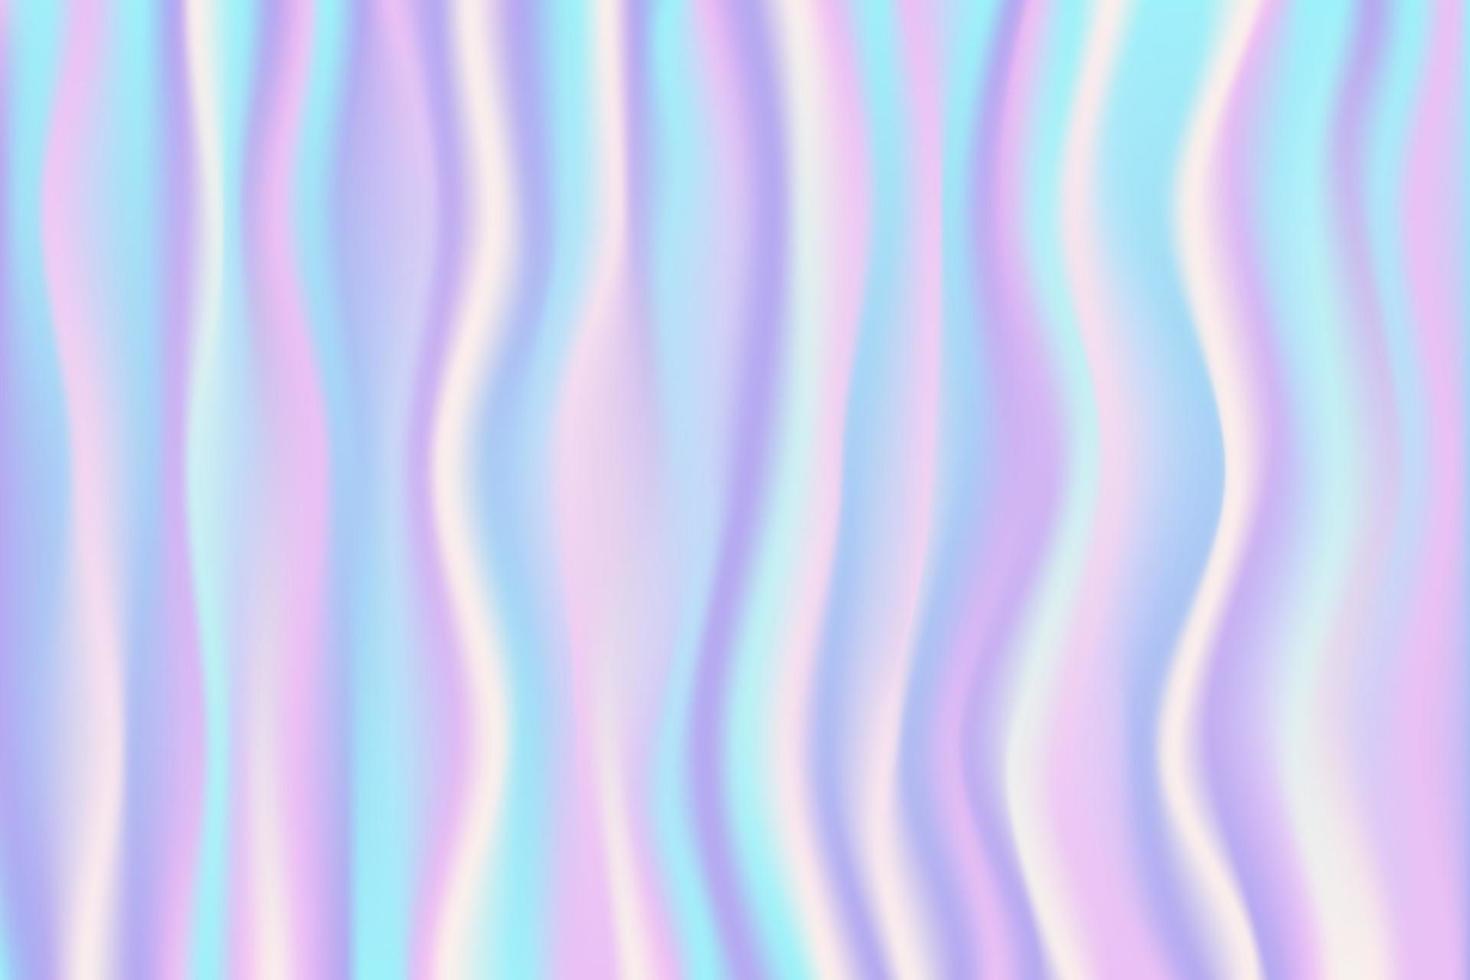 A colorful abstract background with wavy lines - Iridescent